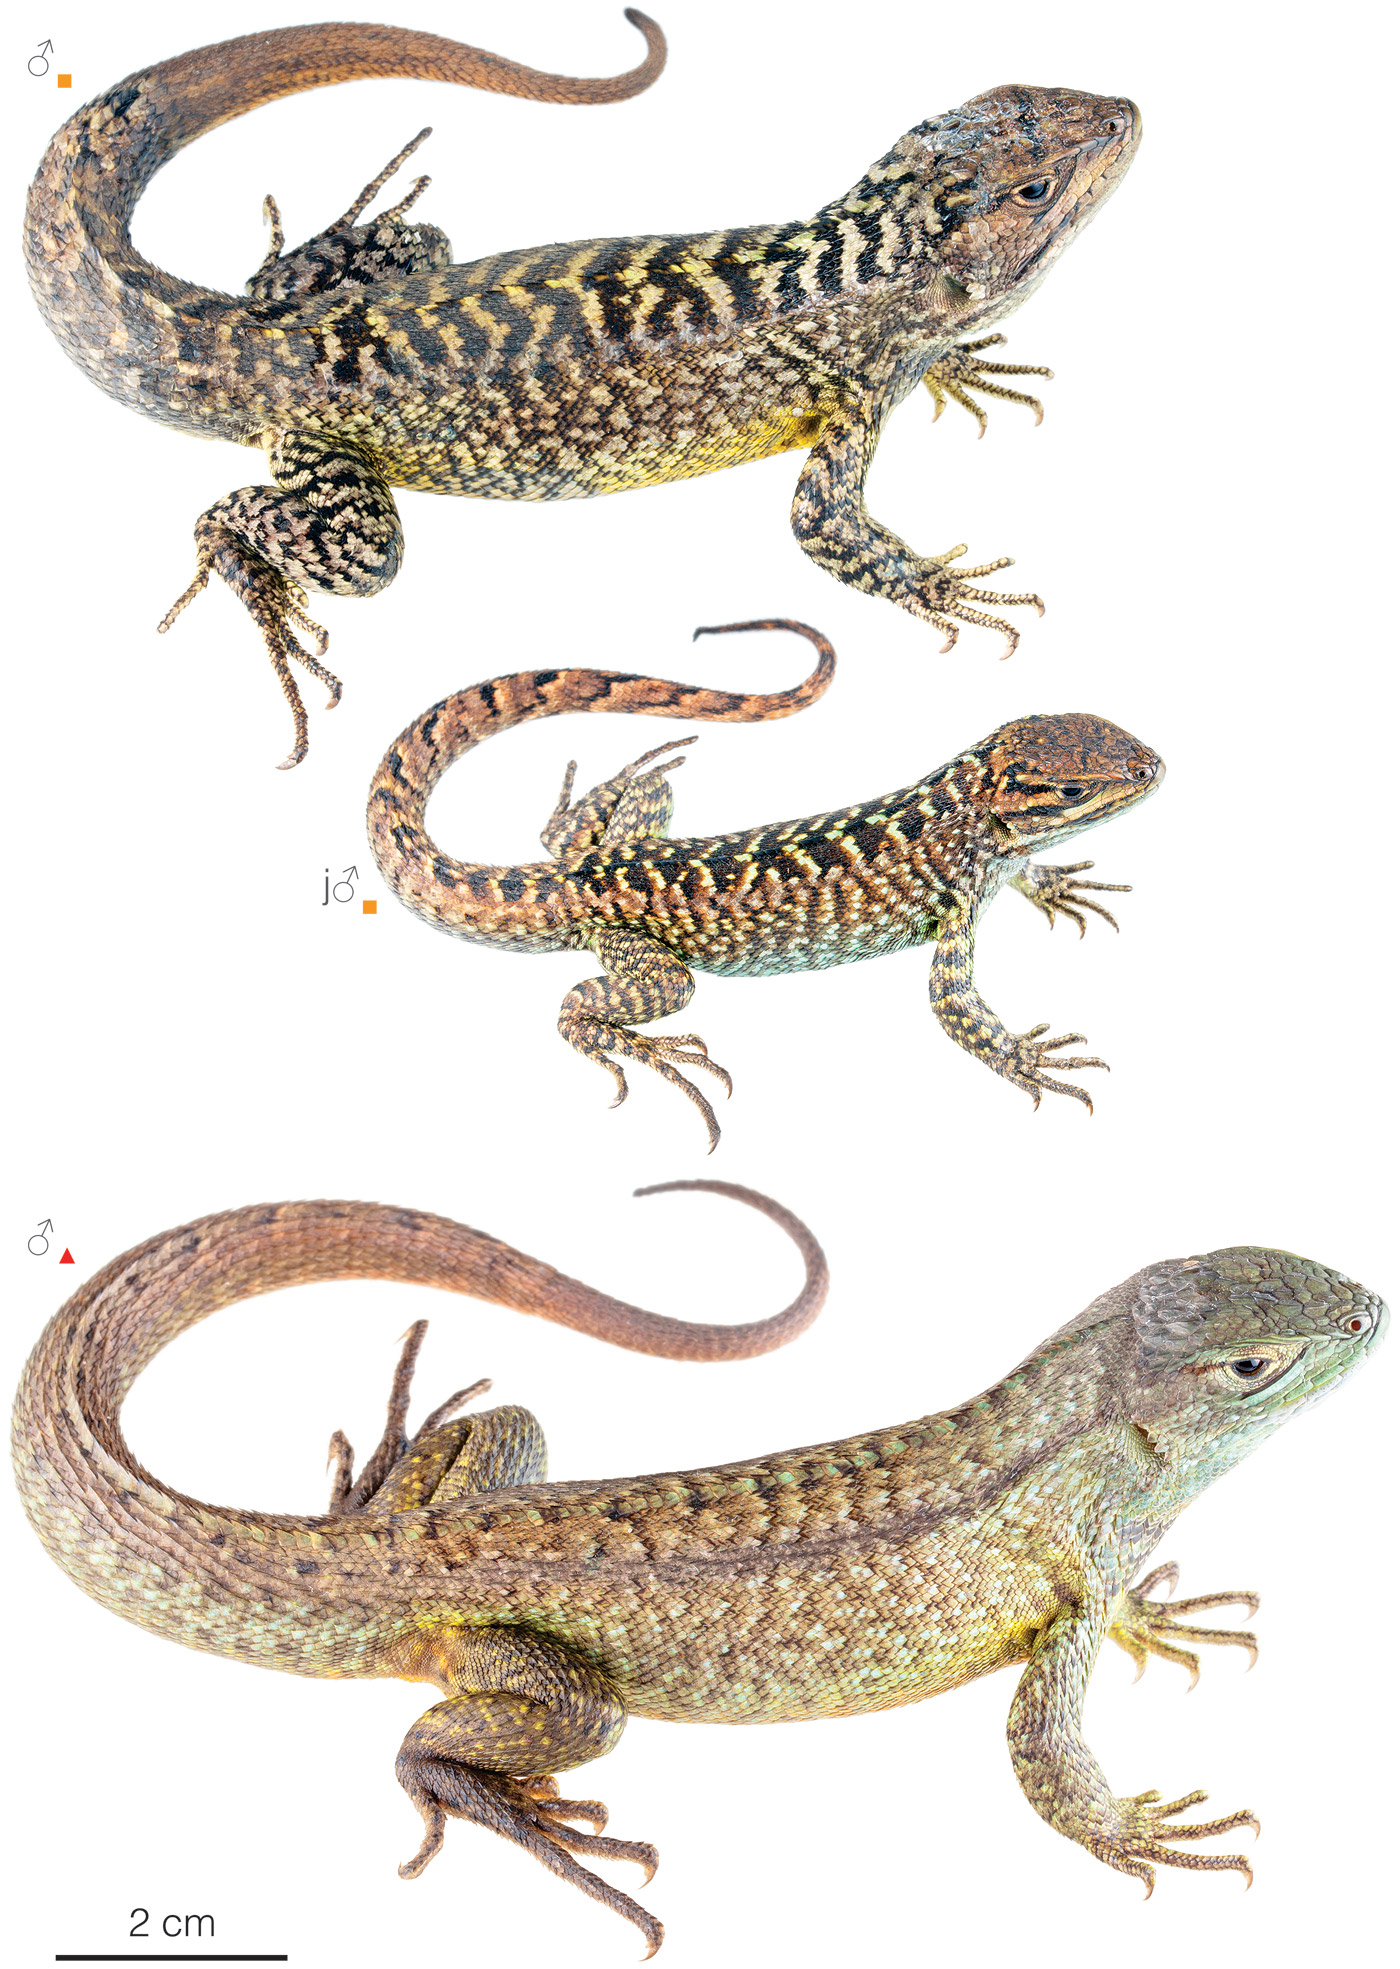 Figure showing variation among individuals of Stenocercus guentheri